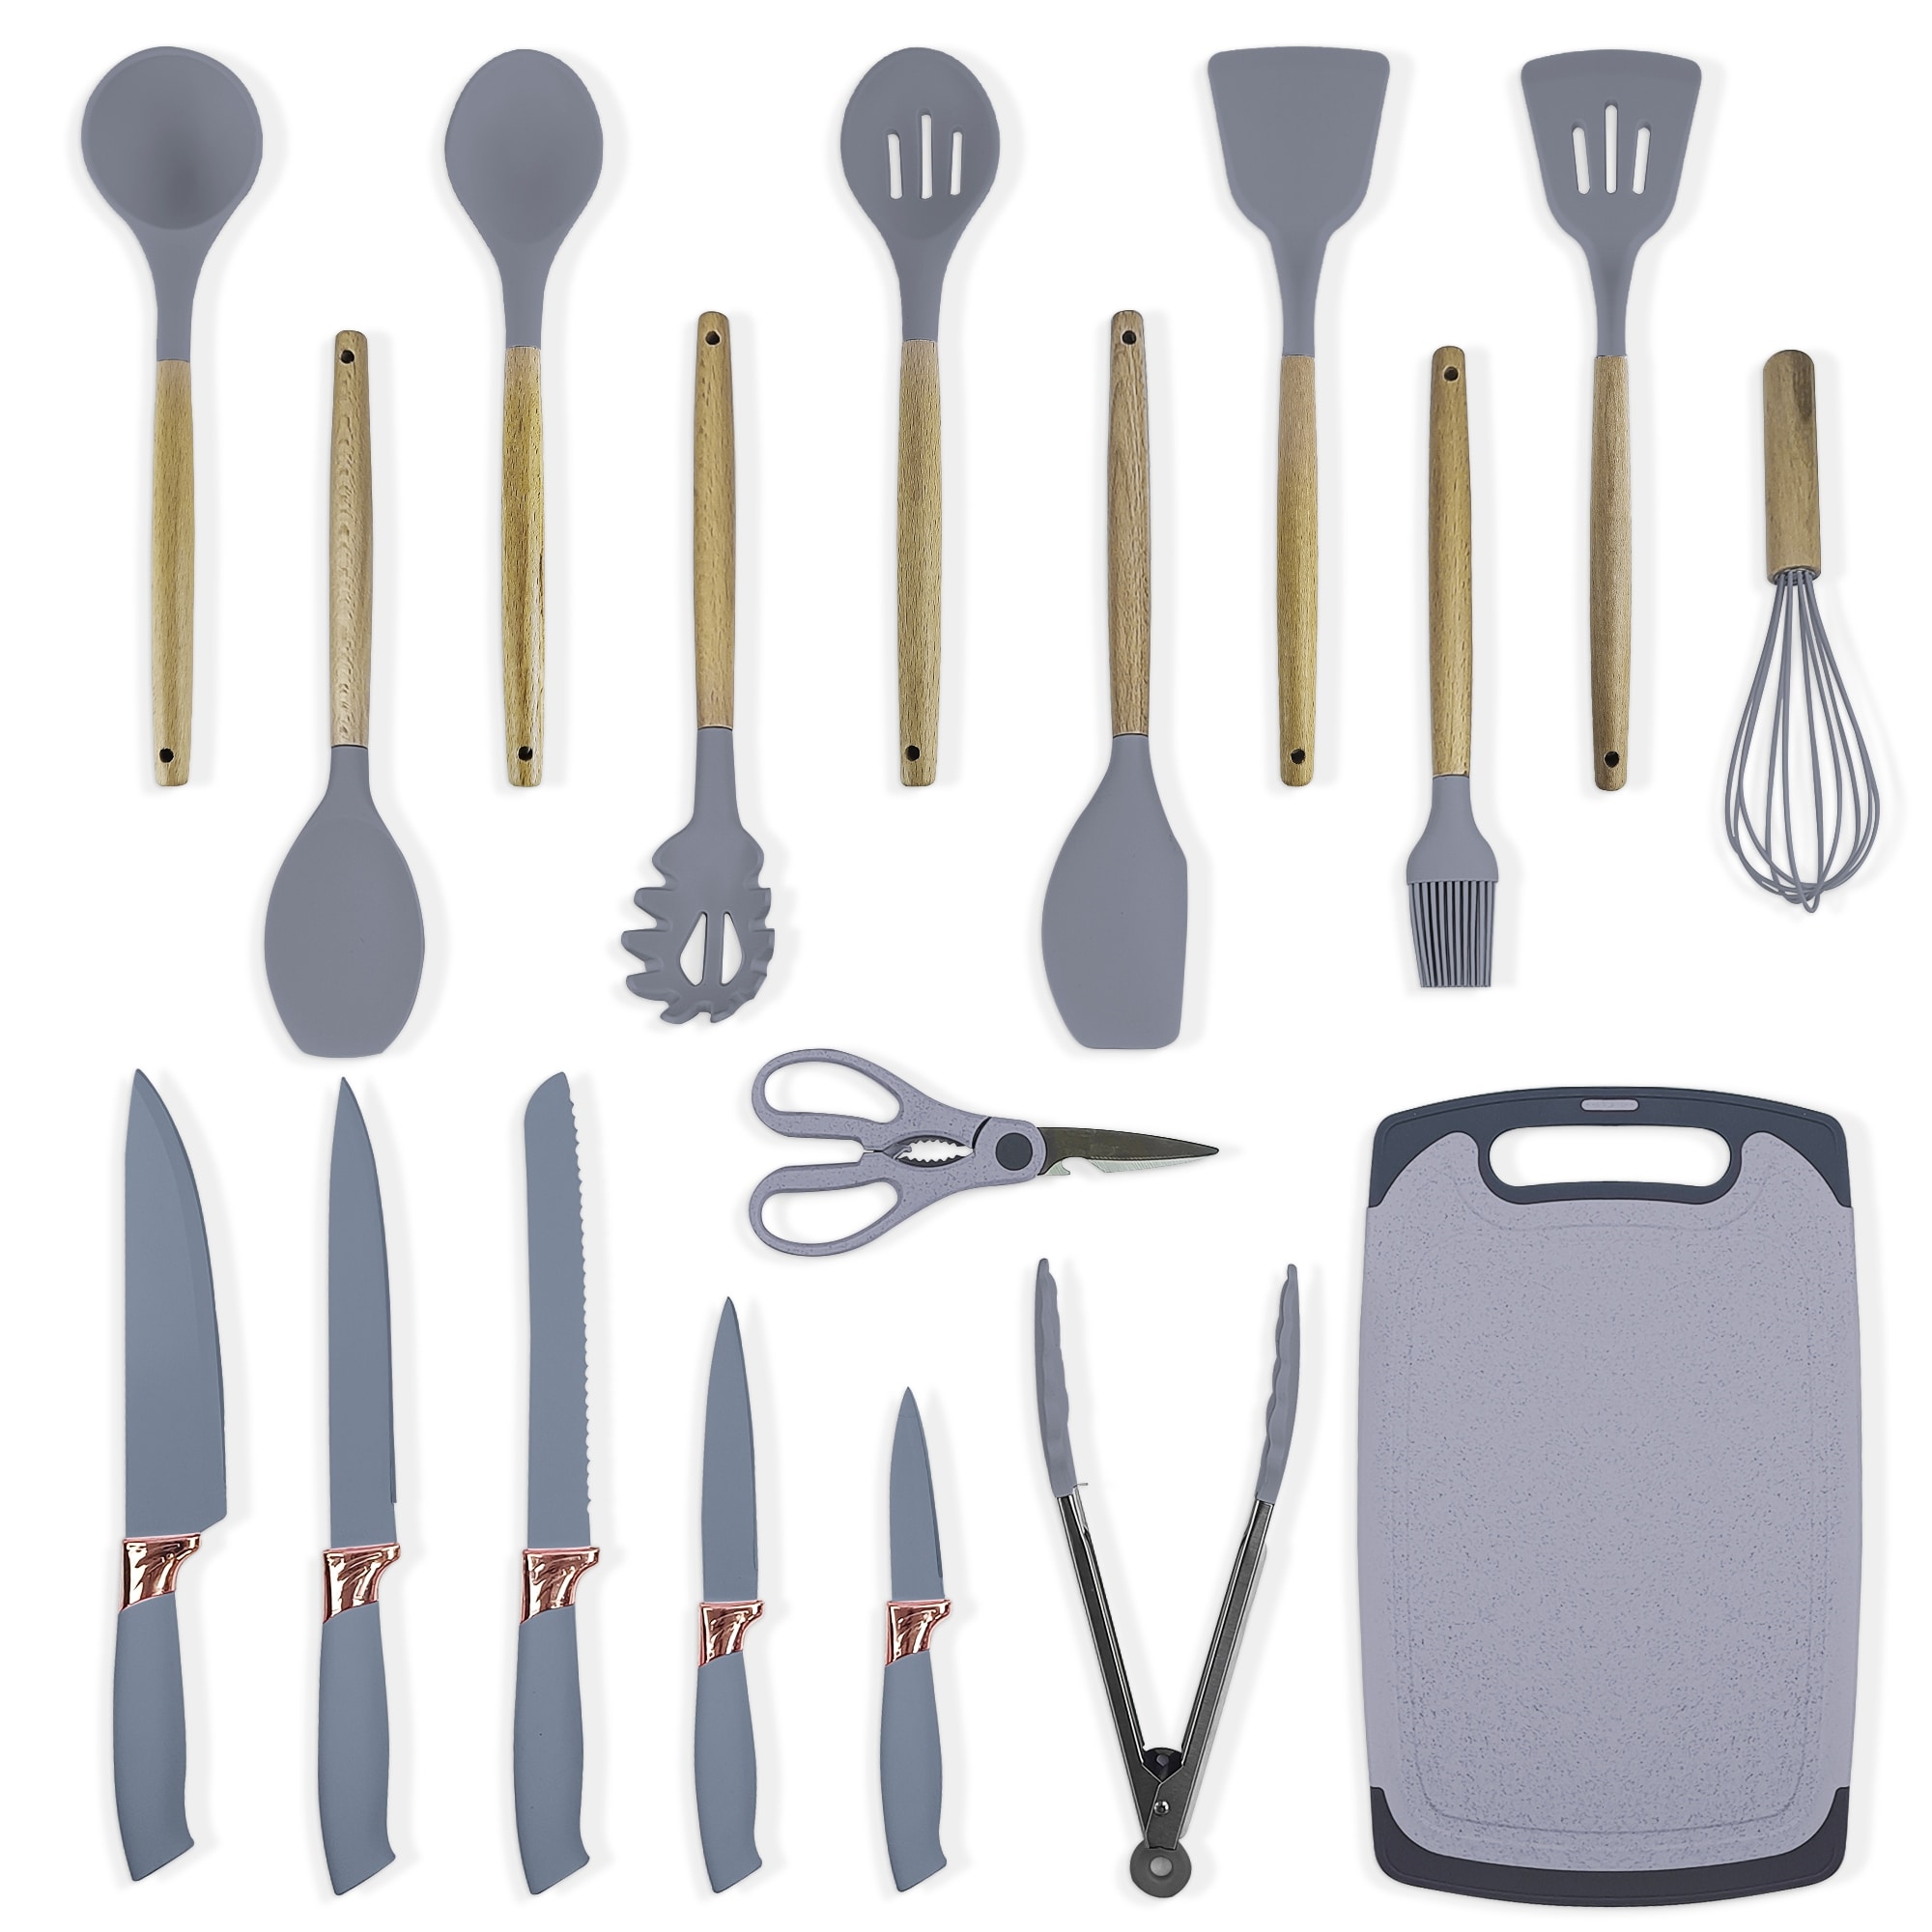 https://ak1.ostkcdn.com/images/products/is/images/direct/b031b2b781376d14e0de1bb8fade2ce7550445cd/19-piece-Non-stick-Silicone-Assorted-Kitchen-Utensil-Set.jpg